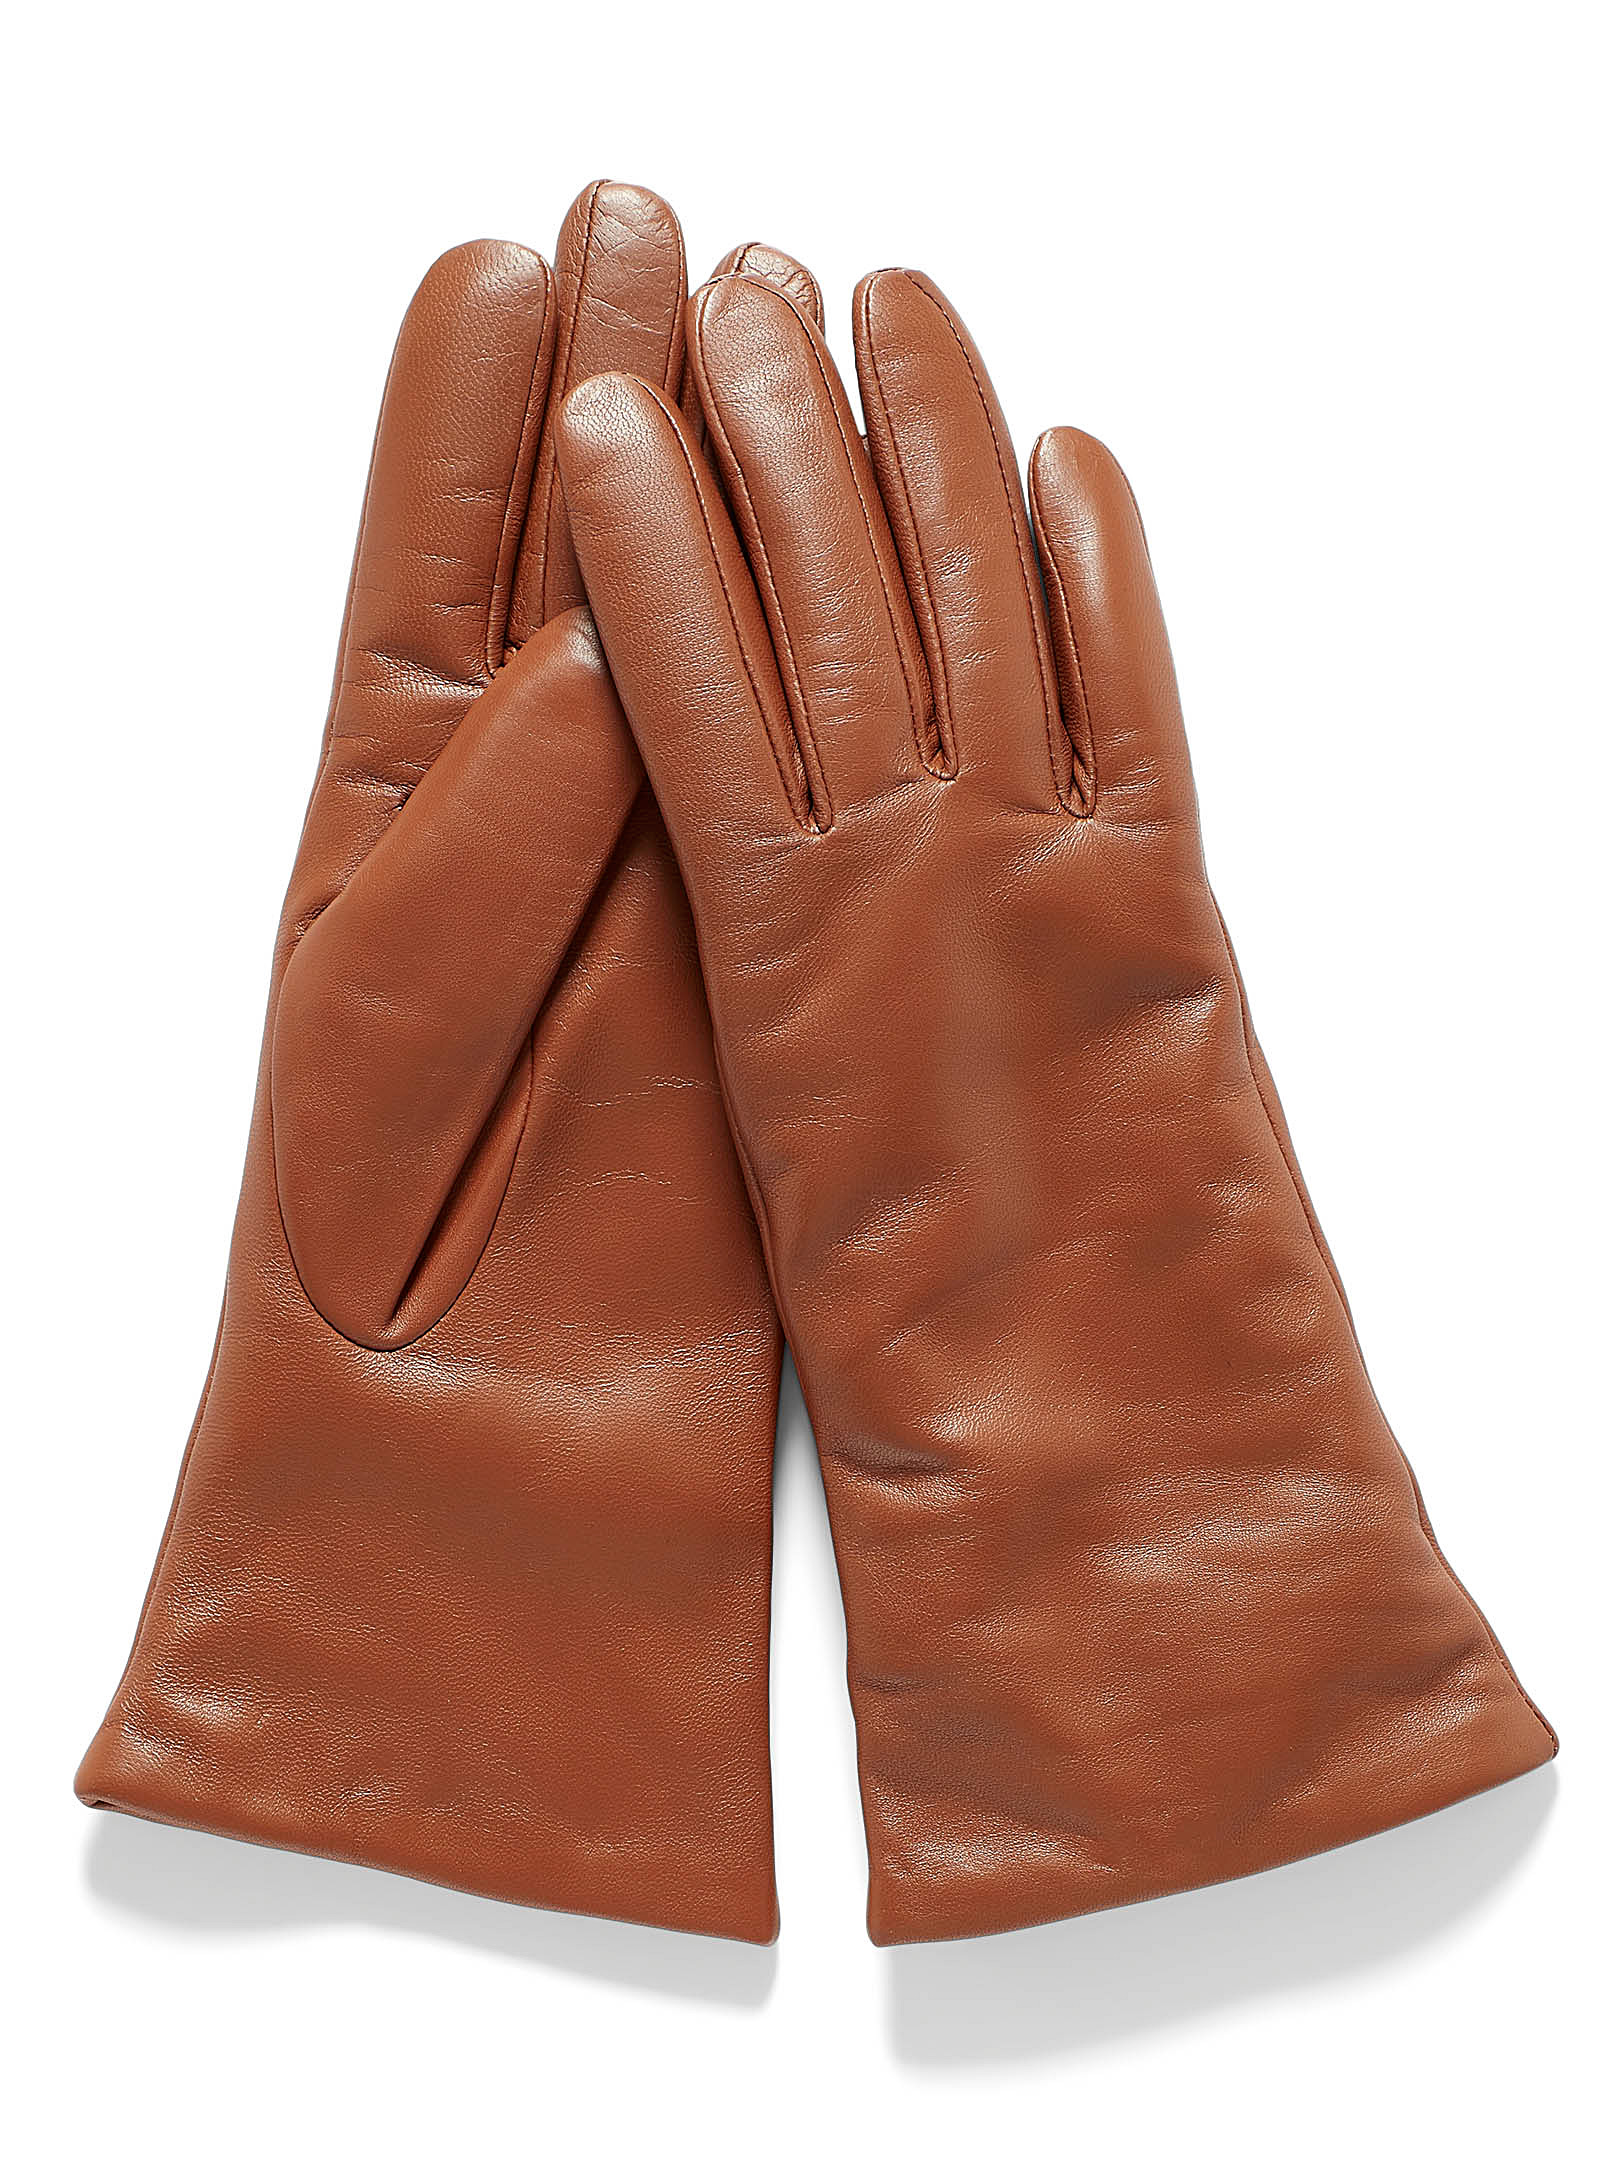 Halifax Seed Company - Electra Women's Water Resistant Gloves